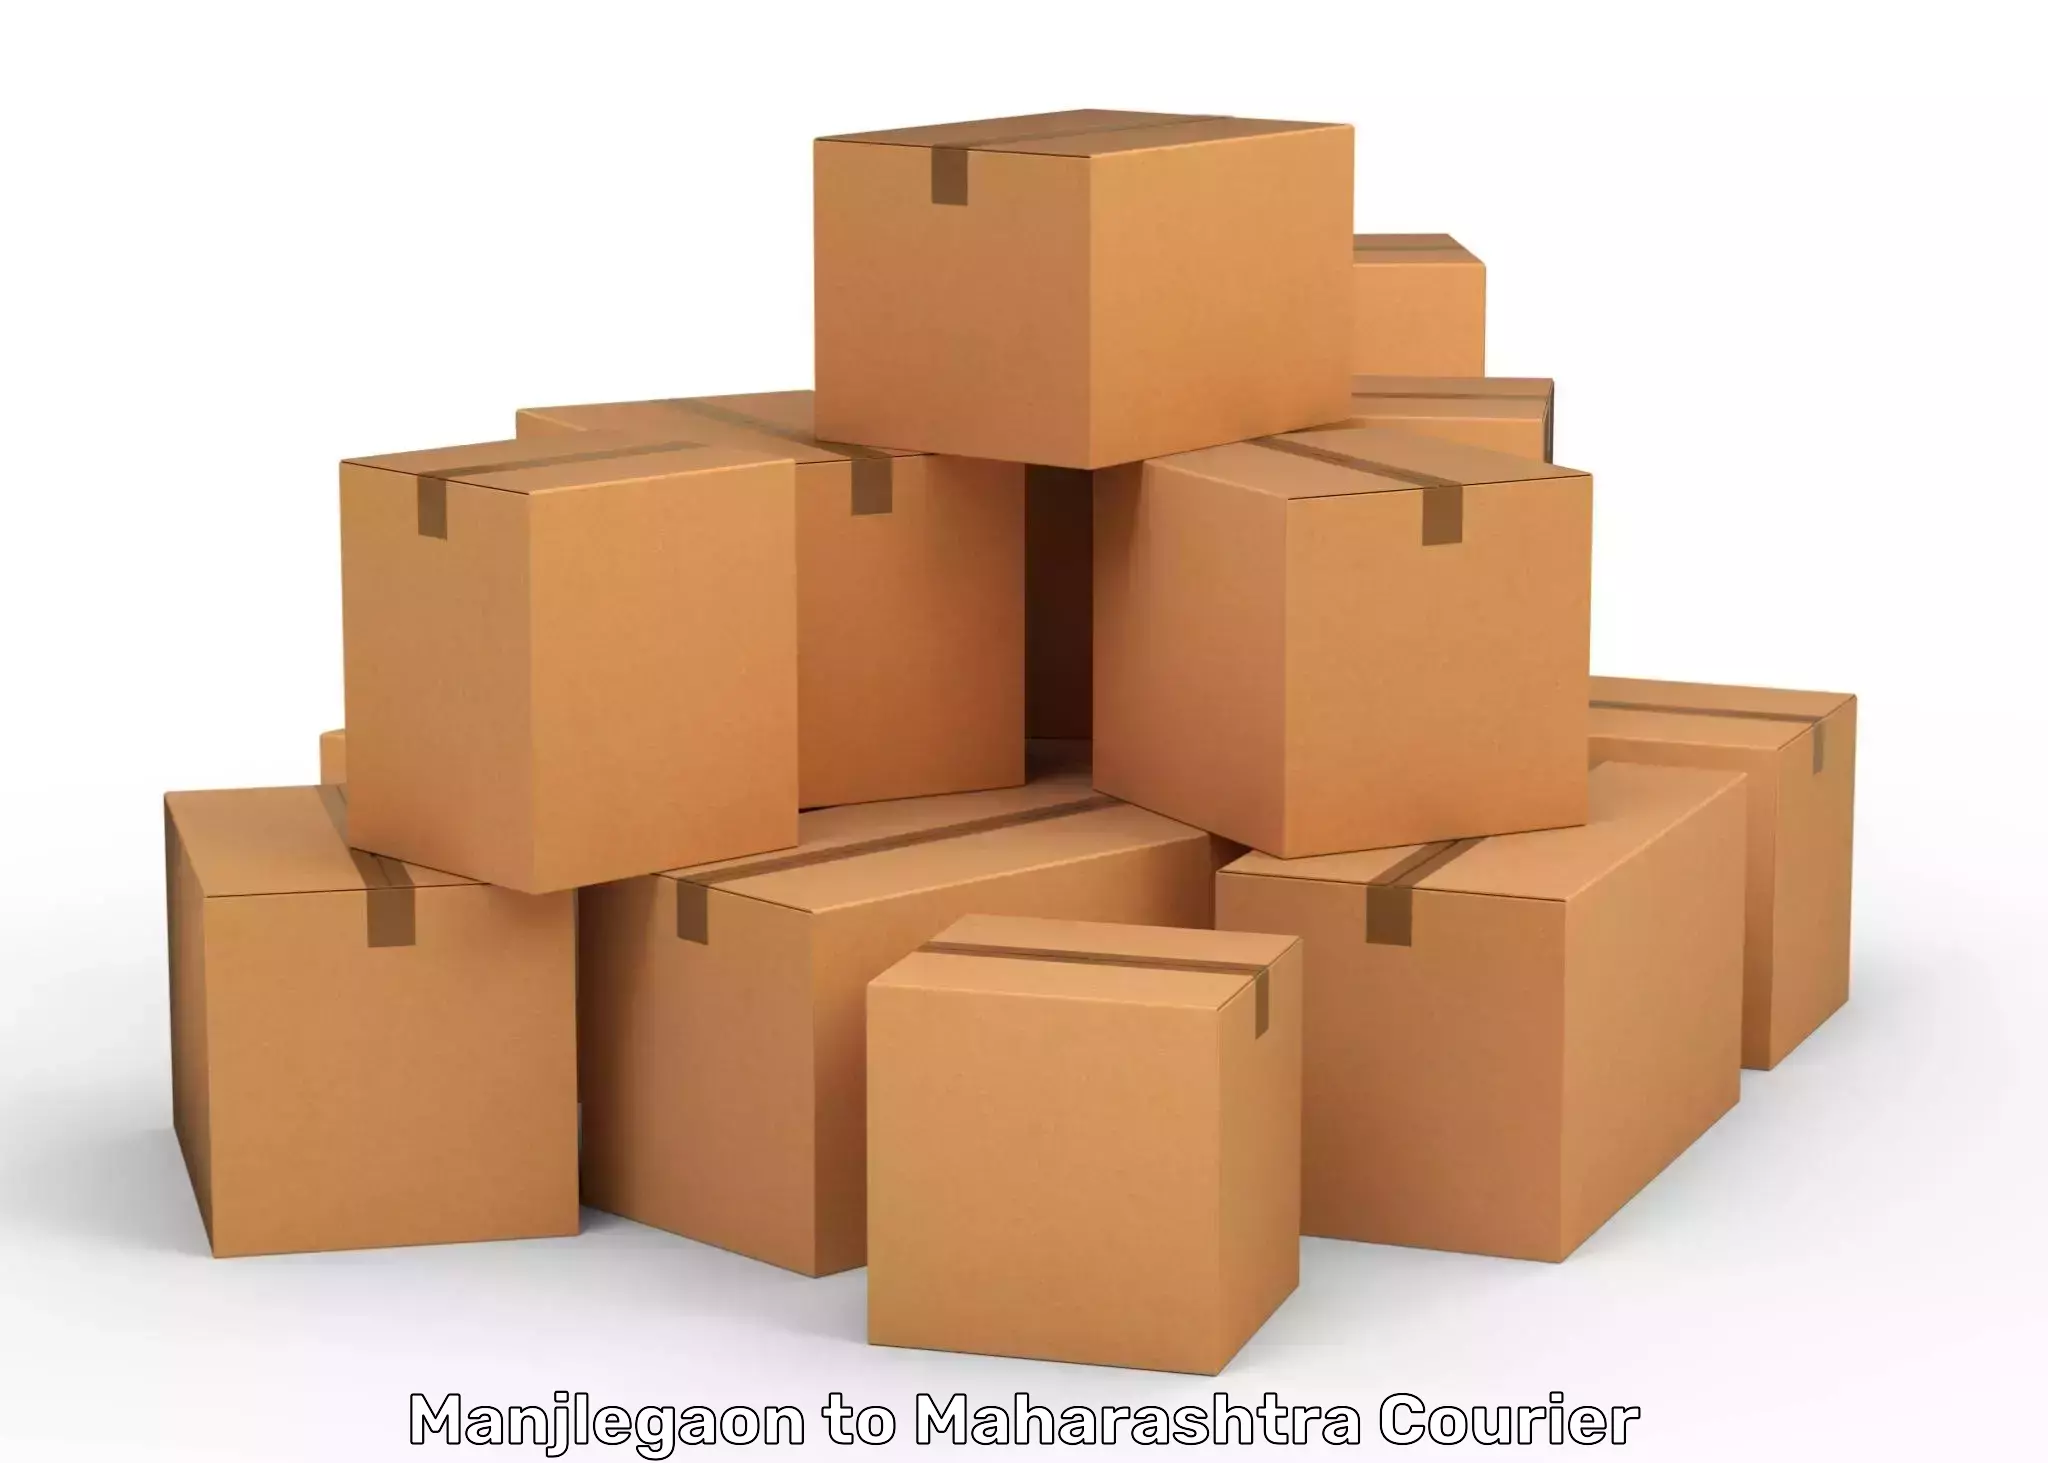 Cost-effective shipping solutions Manjlegaon to Andheri